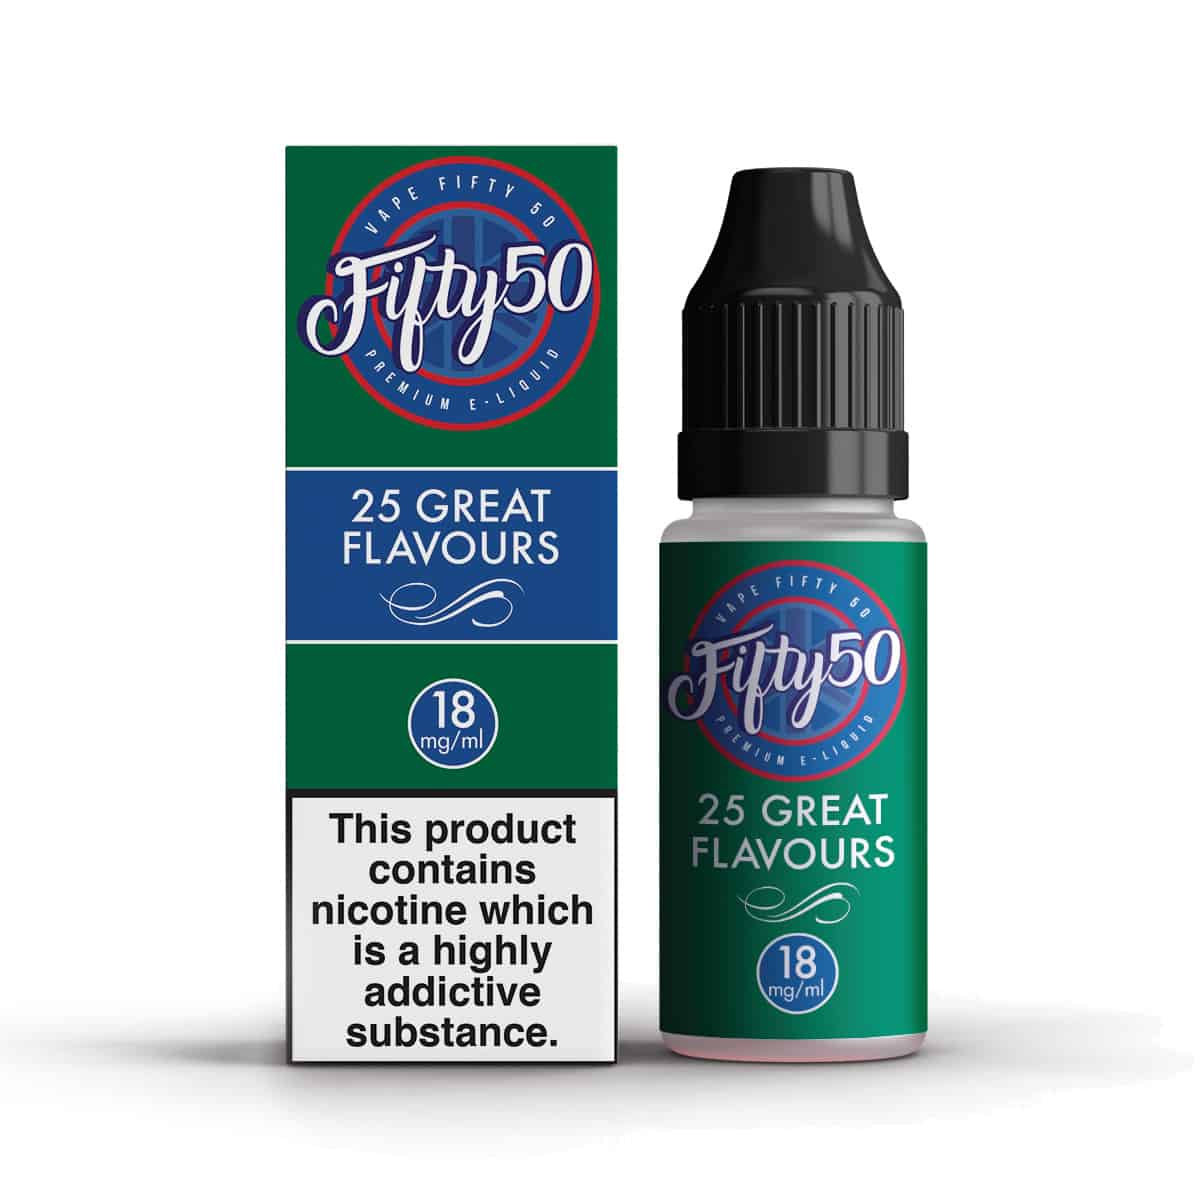 United kingdom UK First Eliquid Subscription Service Vape Made Simple offering Disposables, Freebase, Nic salts -  with a wide variety of disposables Lost Mary Crystal Bar Elf Disposables - 50 Fifty Blue Crystal 18mg